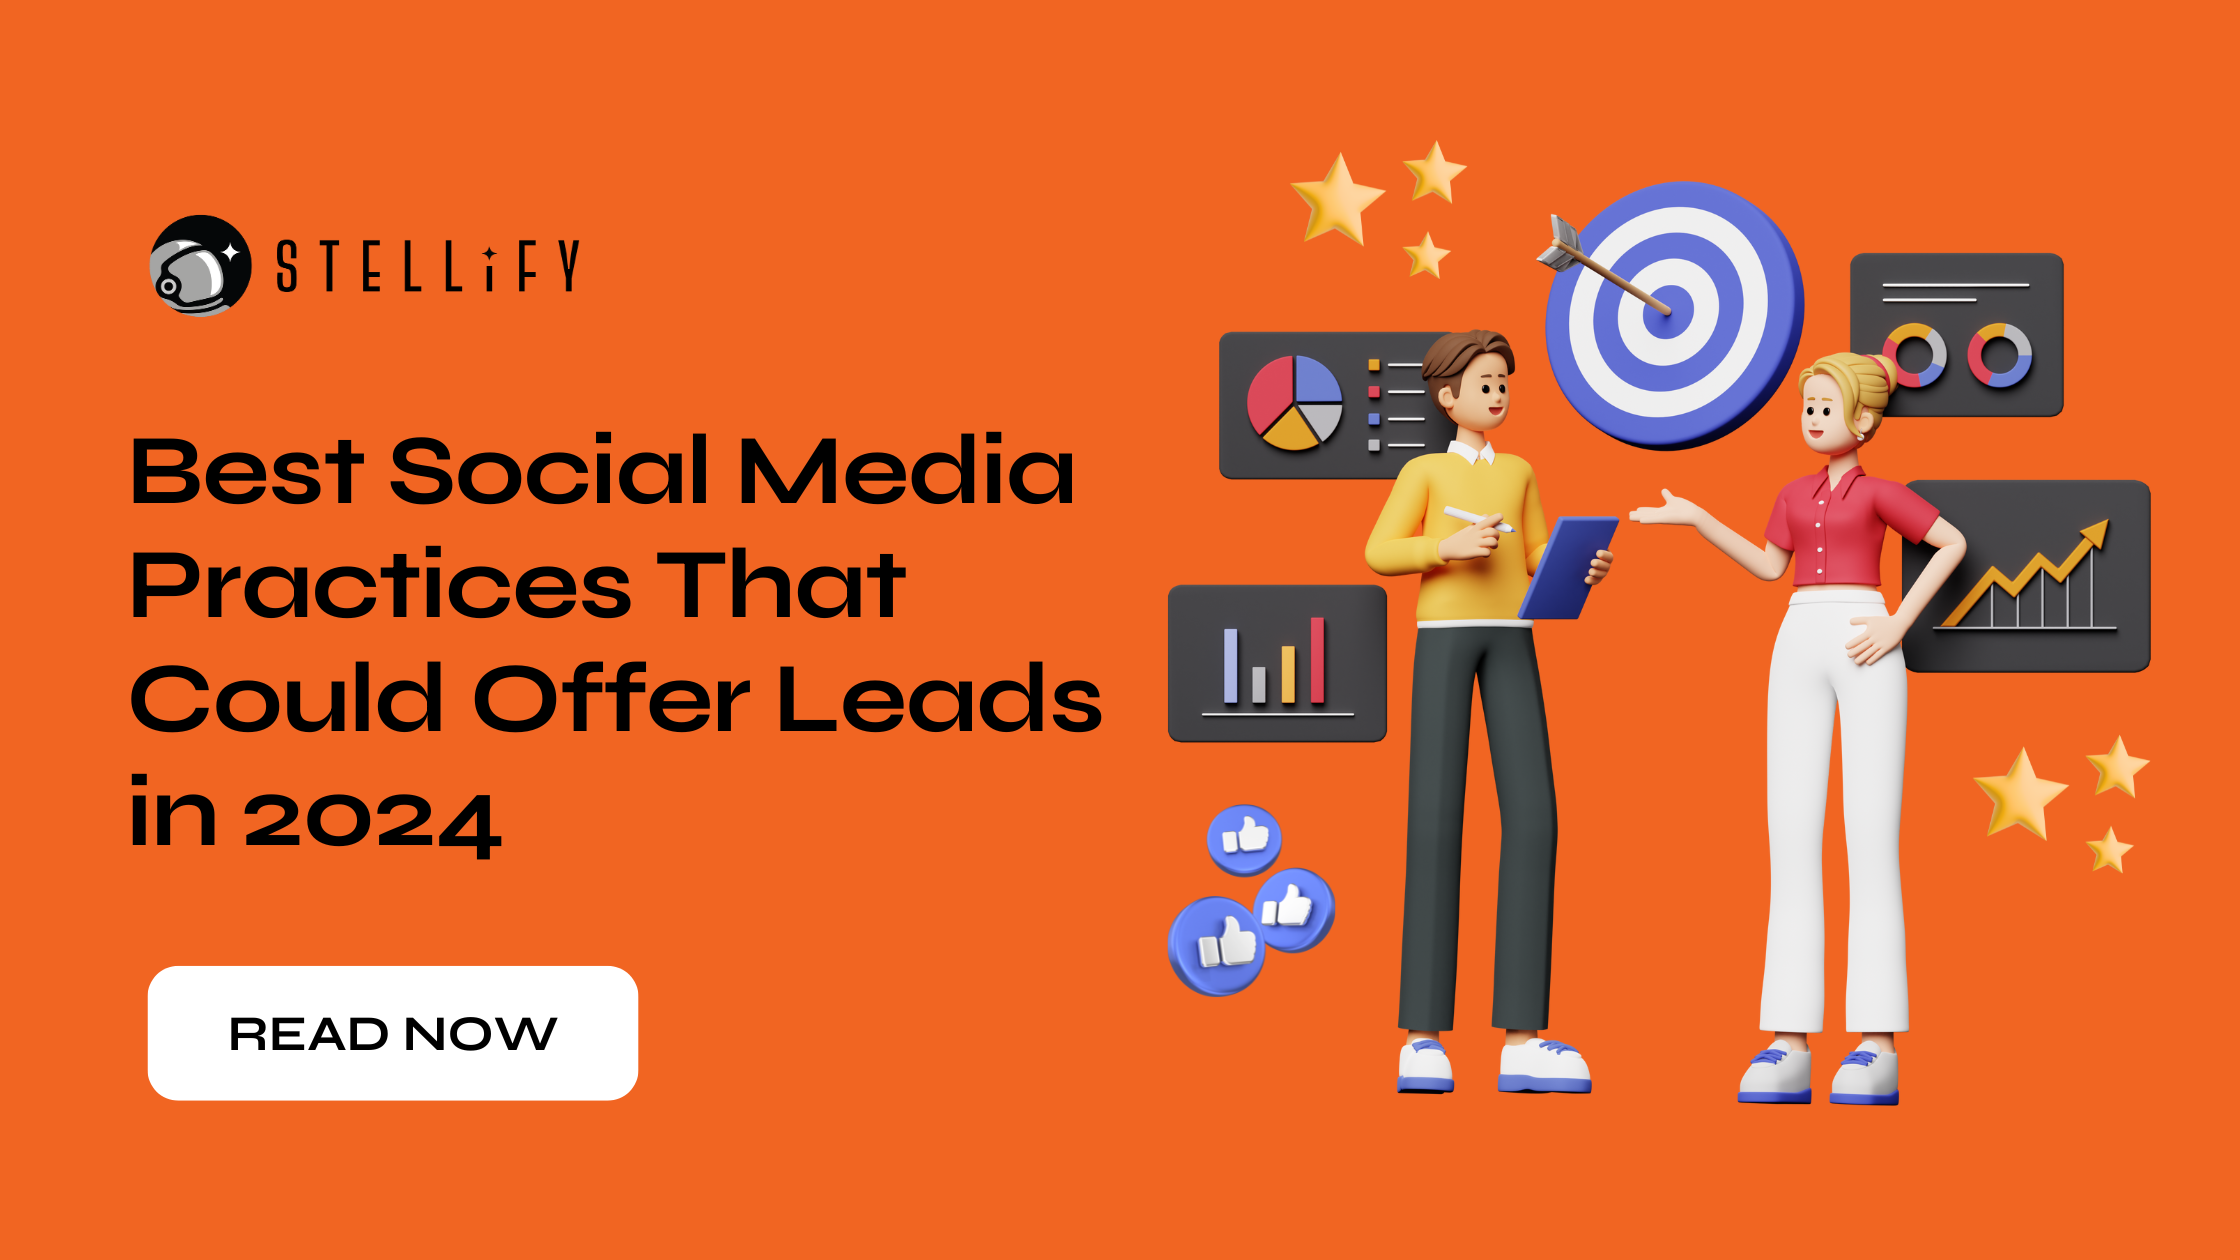 Best Social Media Practices That Could Offer Leads in 2024